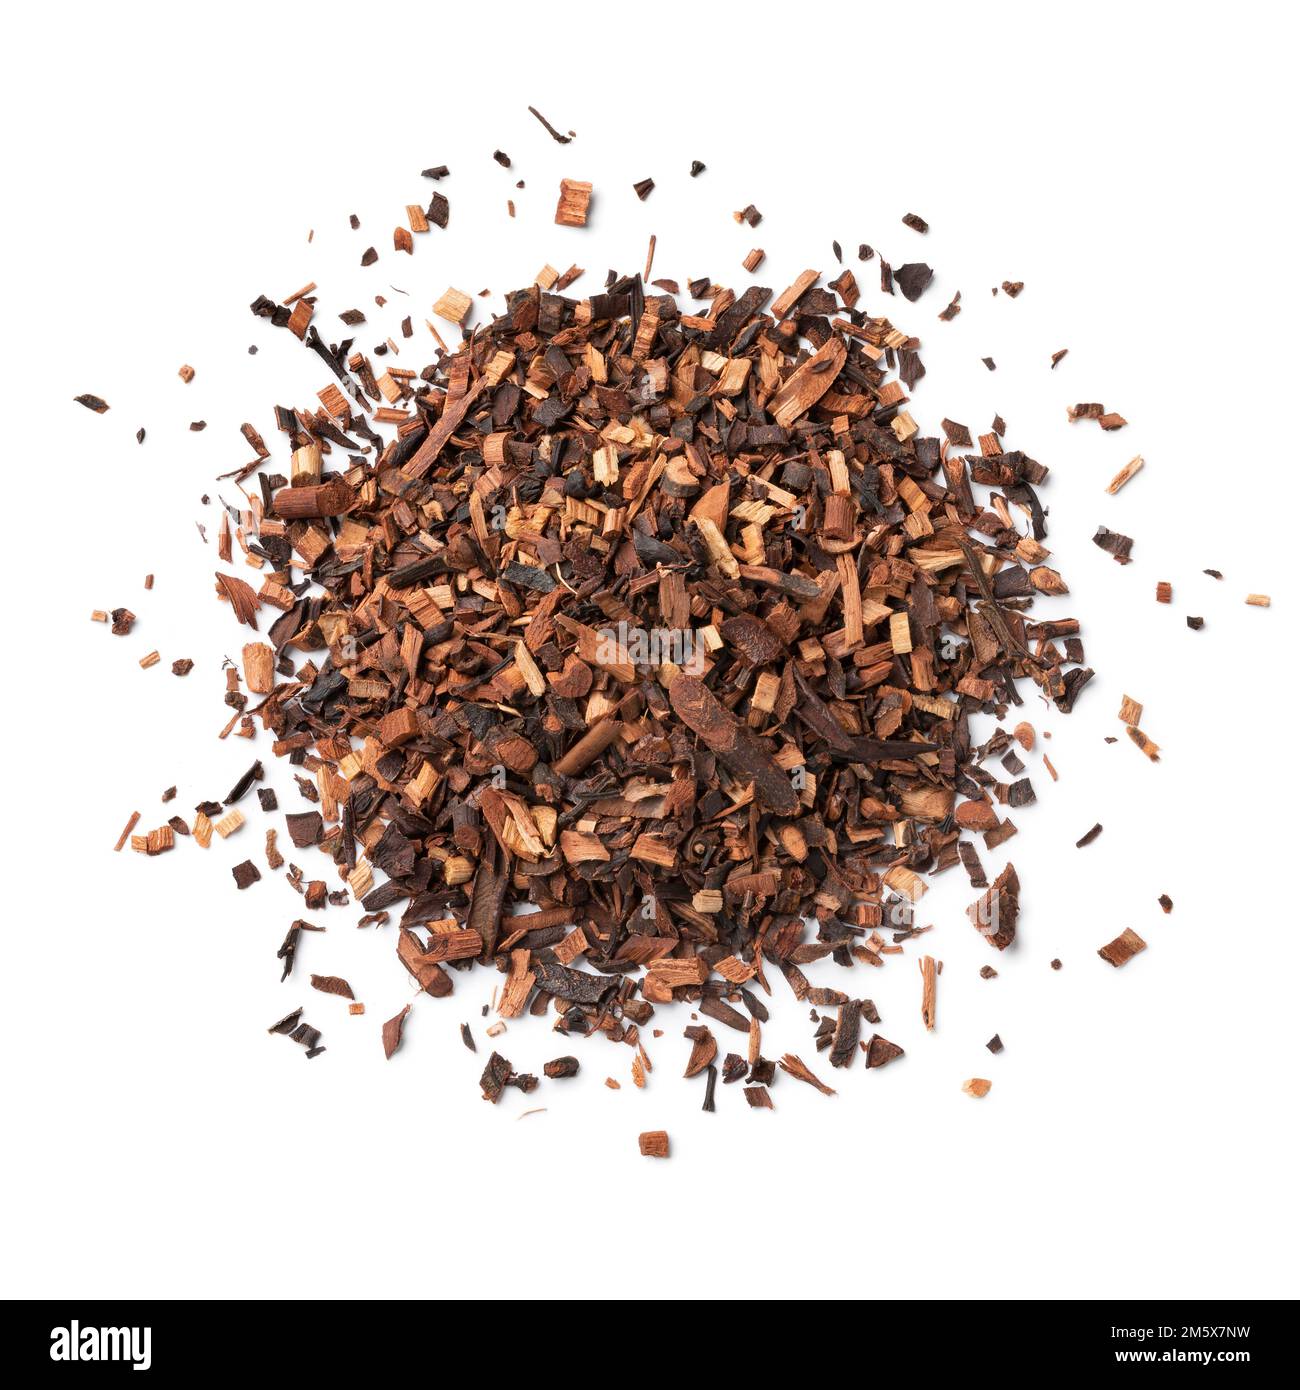 Heap of dried rooibos, bush tea, red tea, redbush tea leaves from South Africa close up on white background Stock Photo